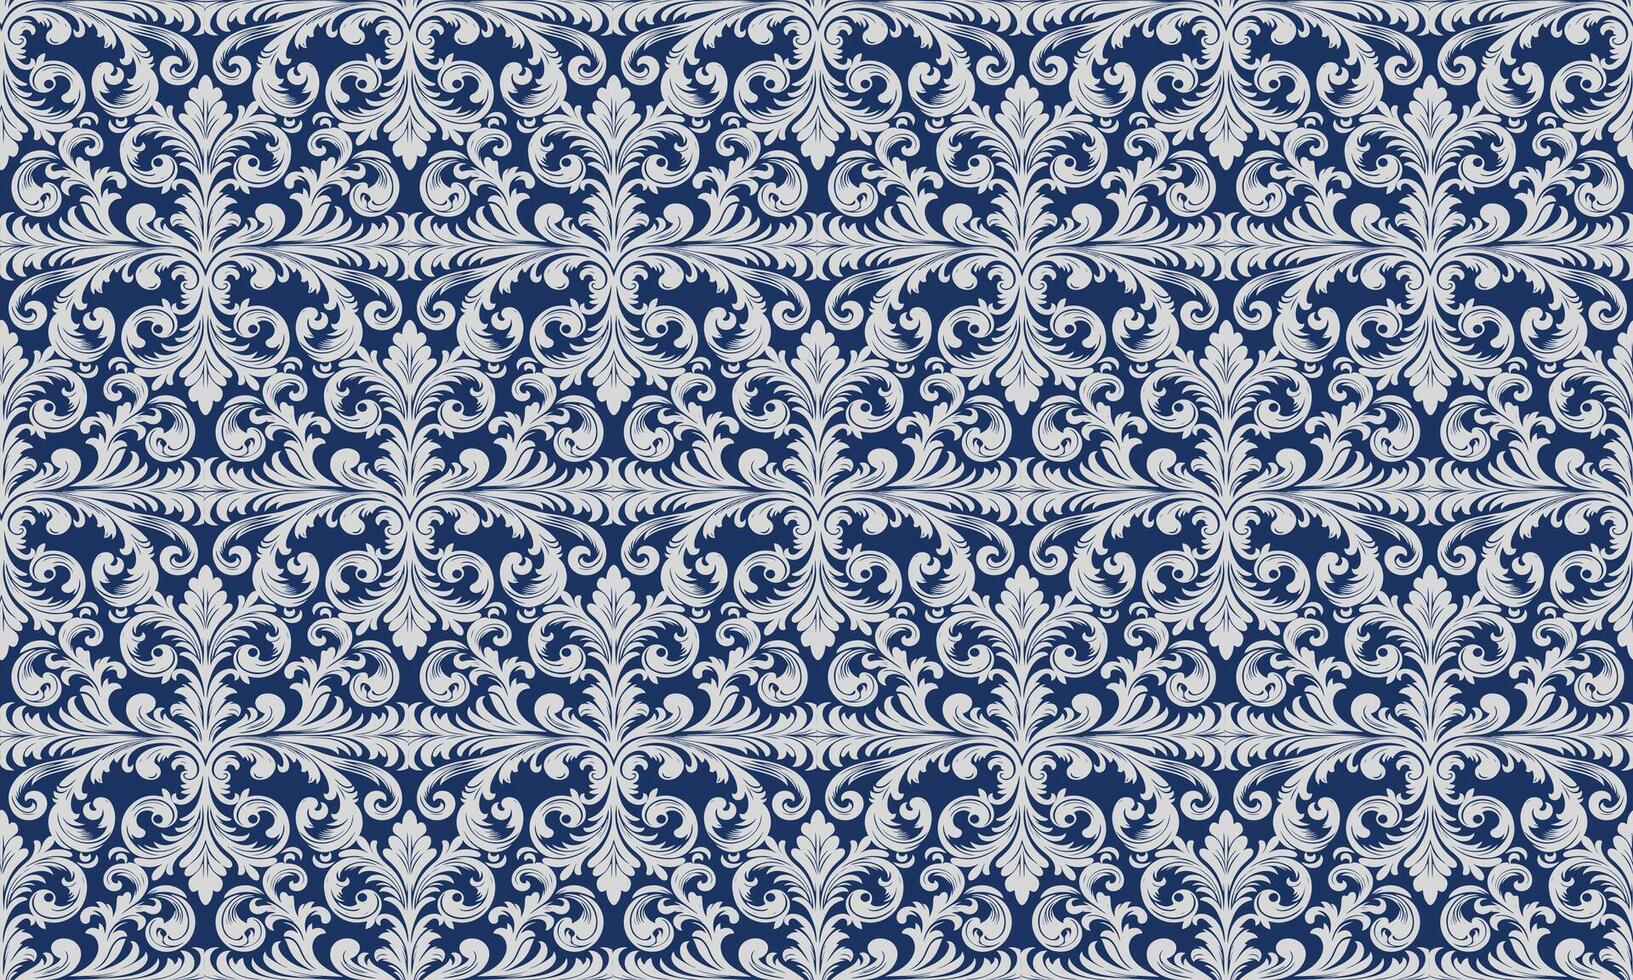 Damask Fabric textile seamless pattern background Luxury decorative Ornamental floral vintage style. Curtain, carpet, wallpaper, clothing, wrapping, textile vector